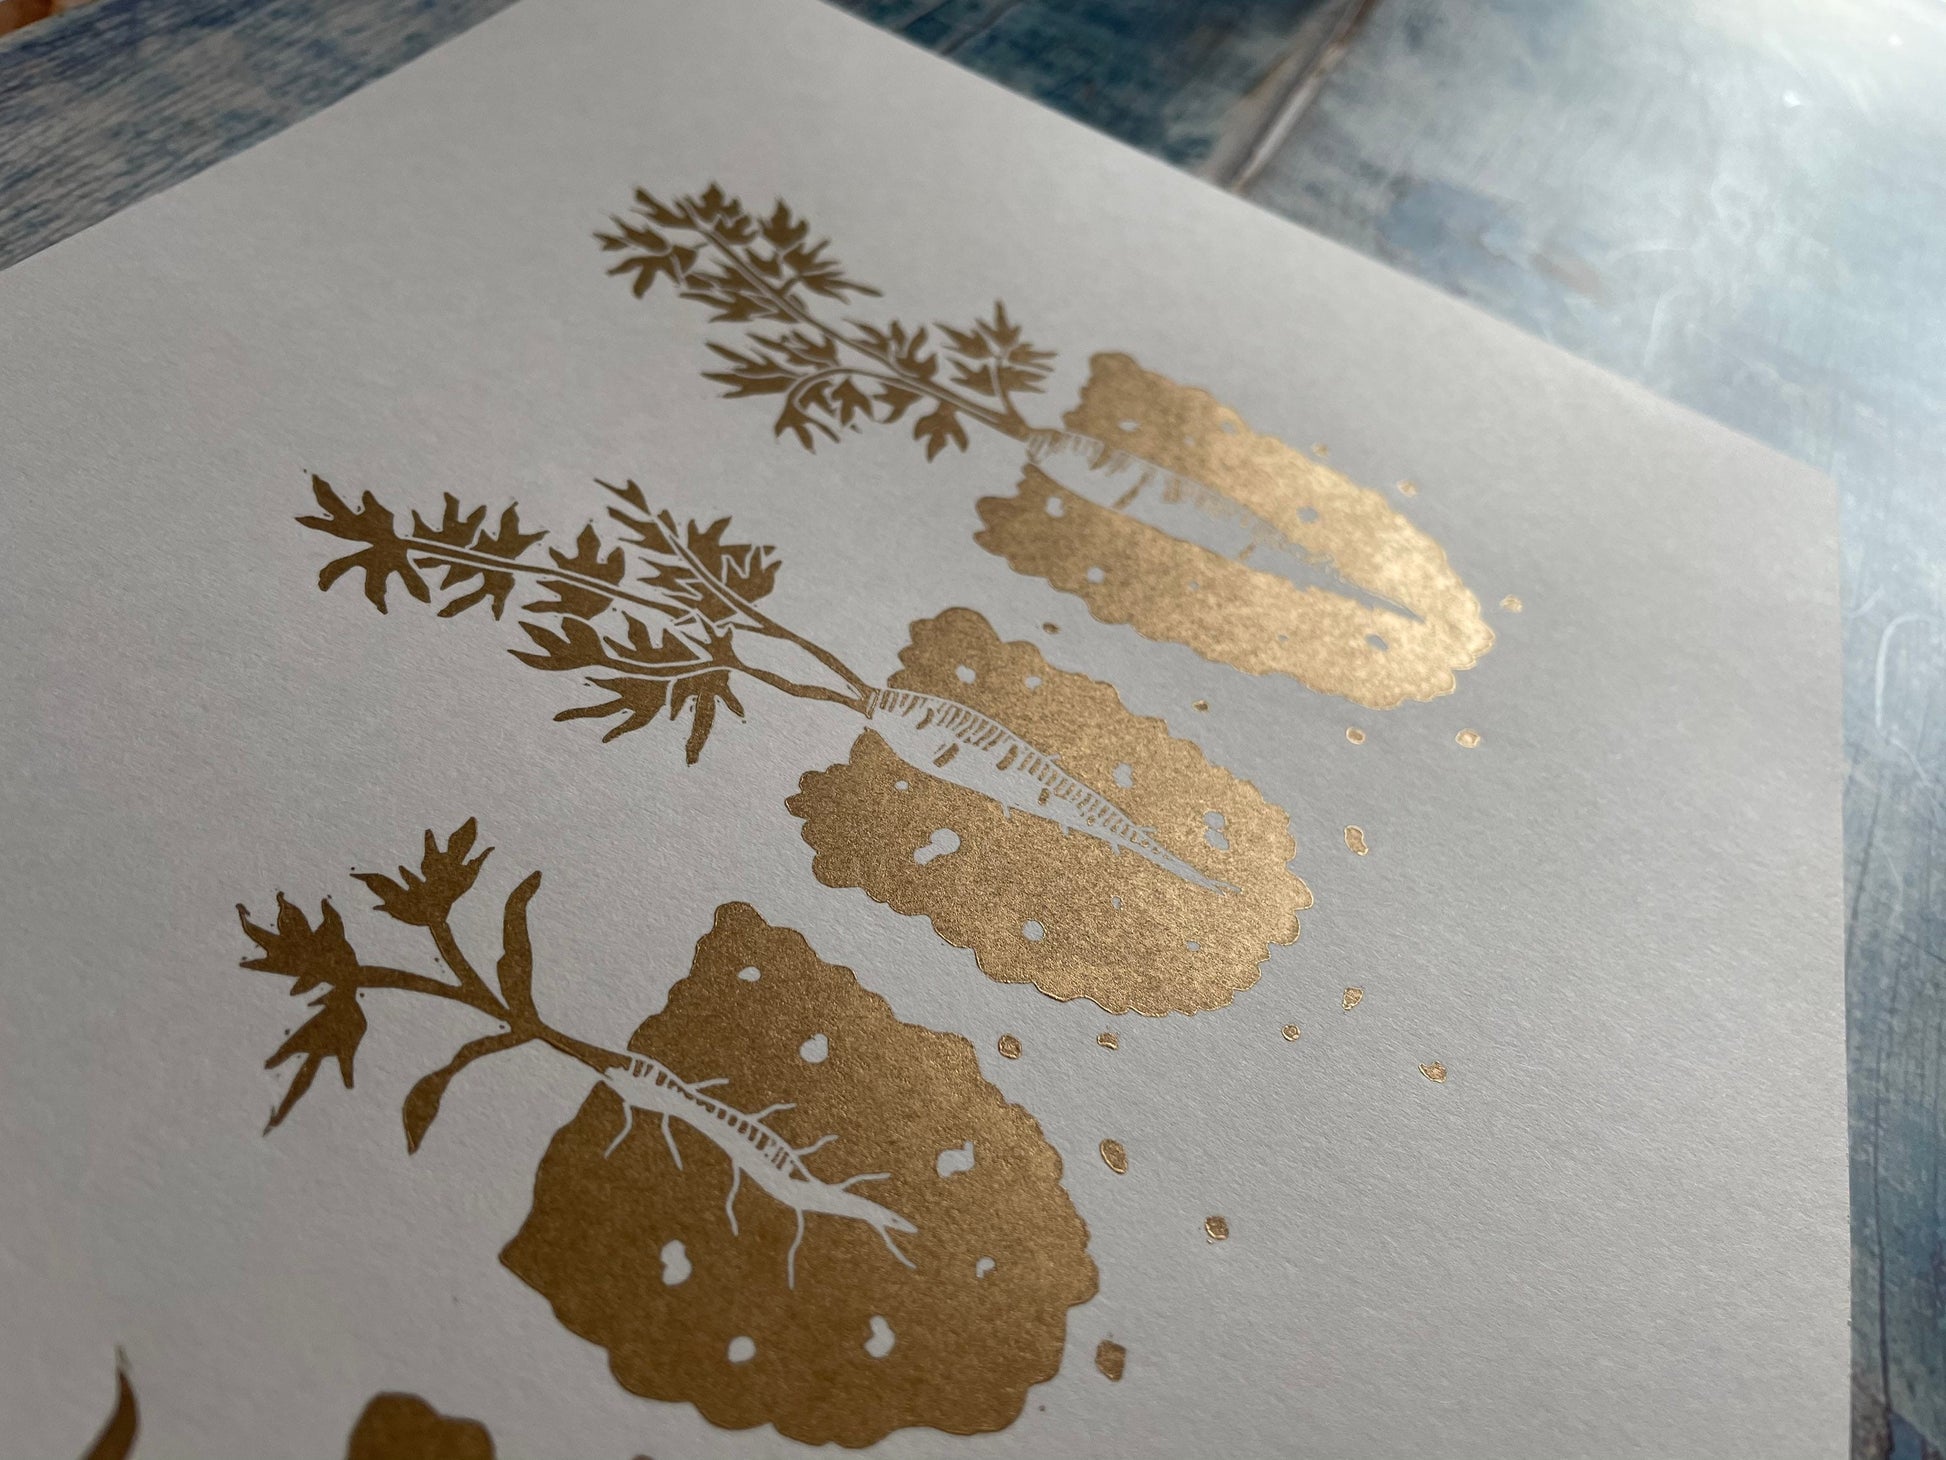 A lino print showing the different stages of a carrot growing from seedling to ready to pick in gold